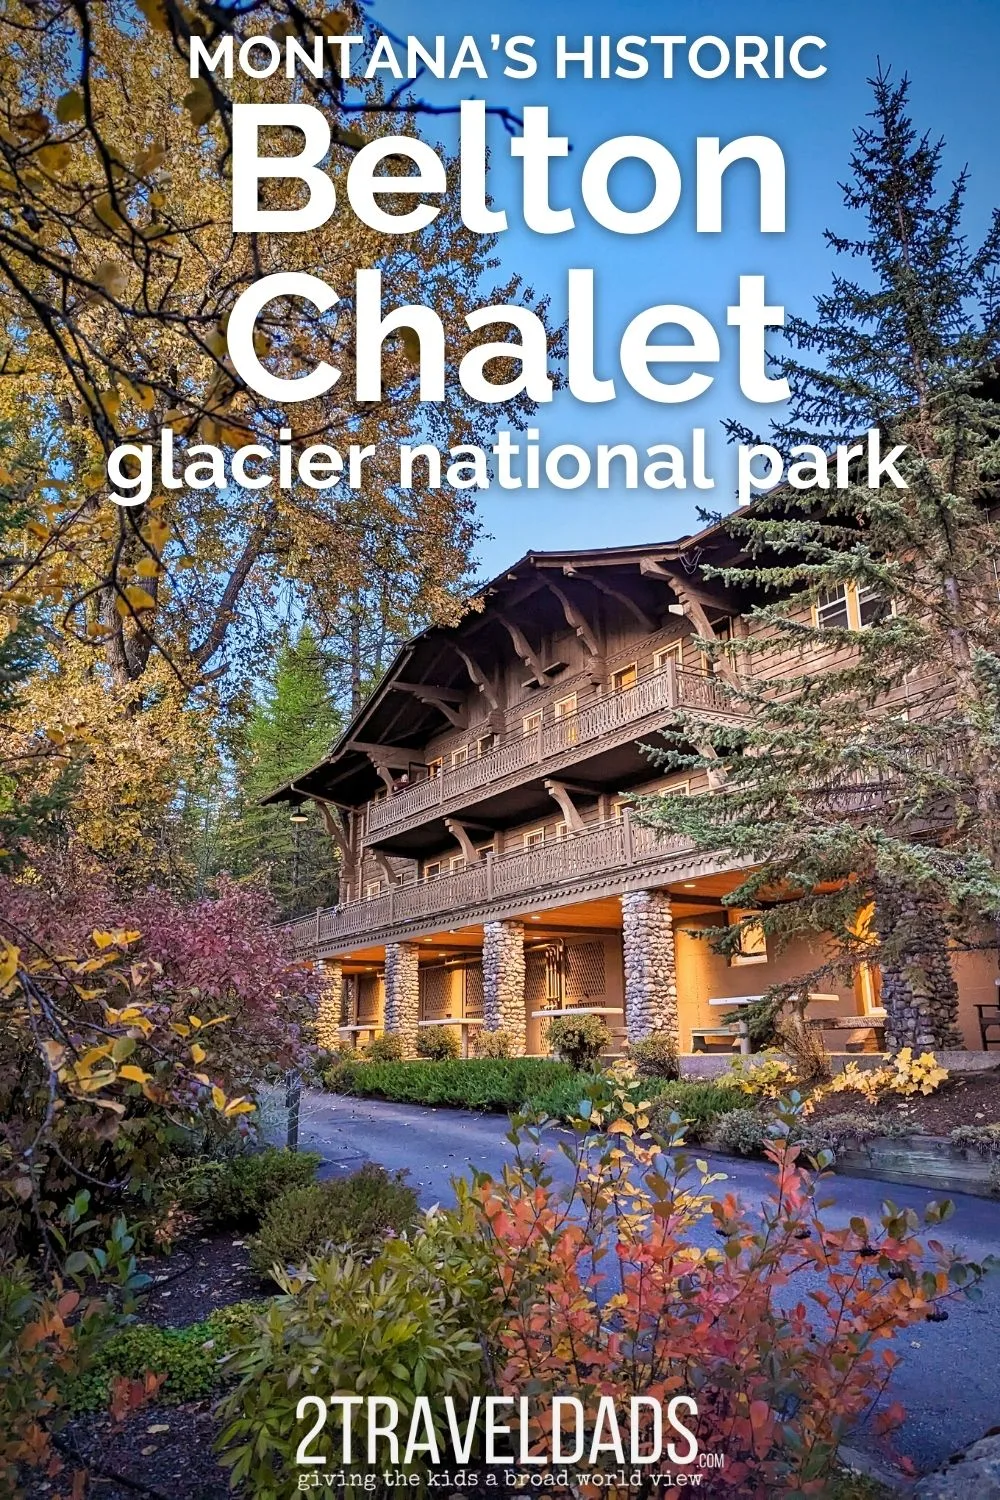 The Belton Chalet is a historic railway hotel at Glacier National Park. See what this 1910 lodge is like and details for booking the Belton Chalet for a unique Glacier NP visit.